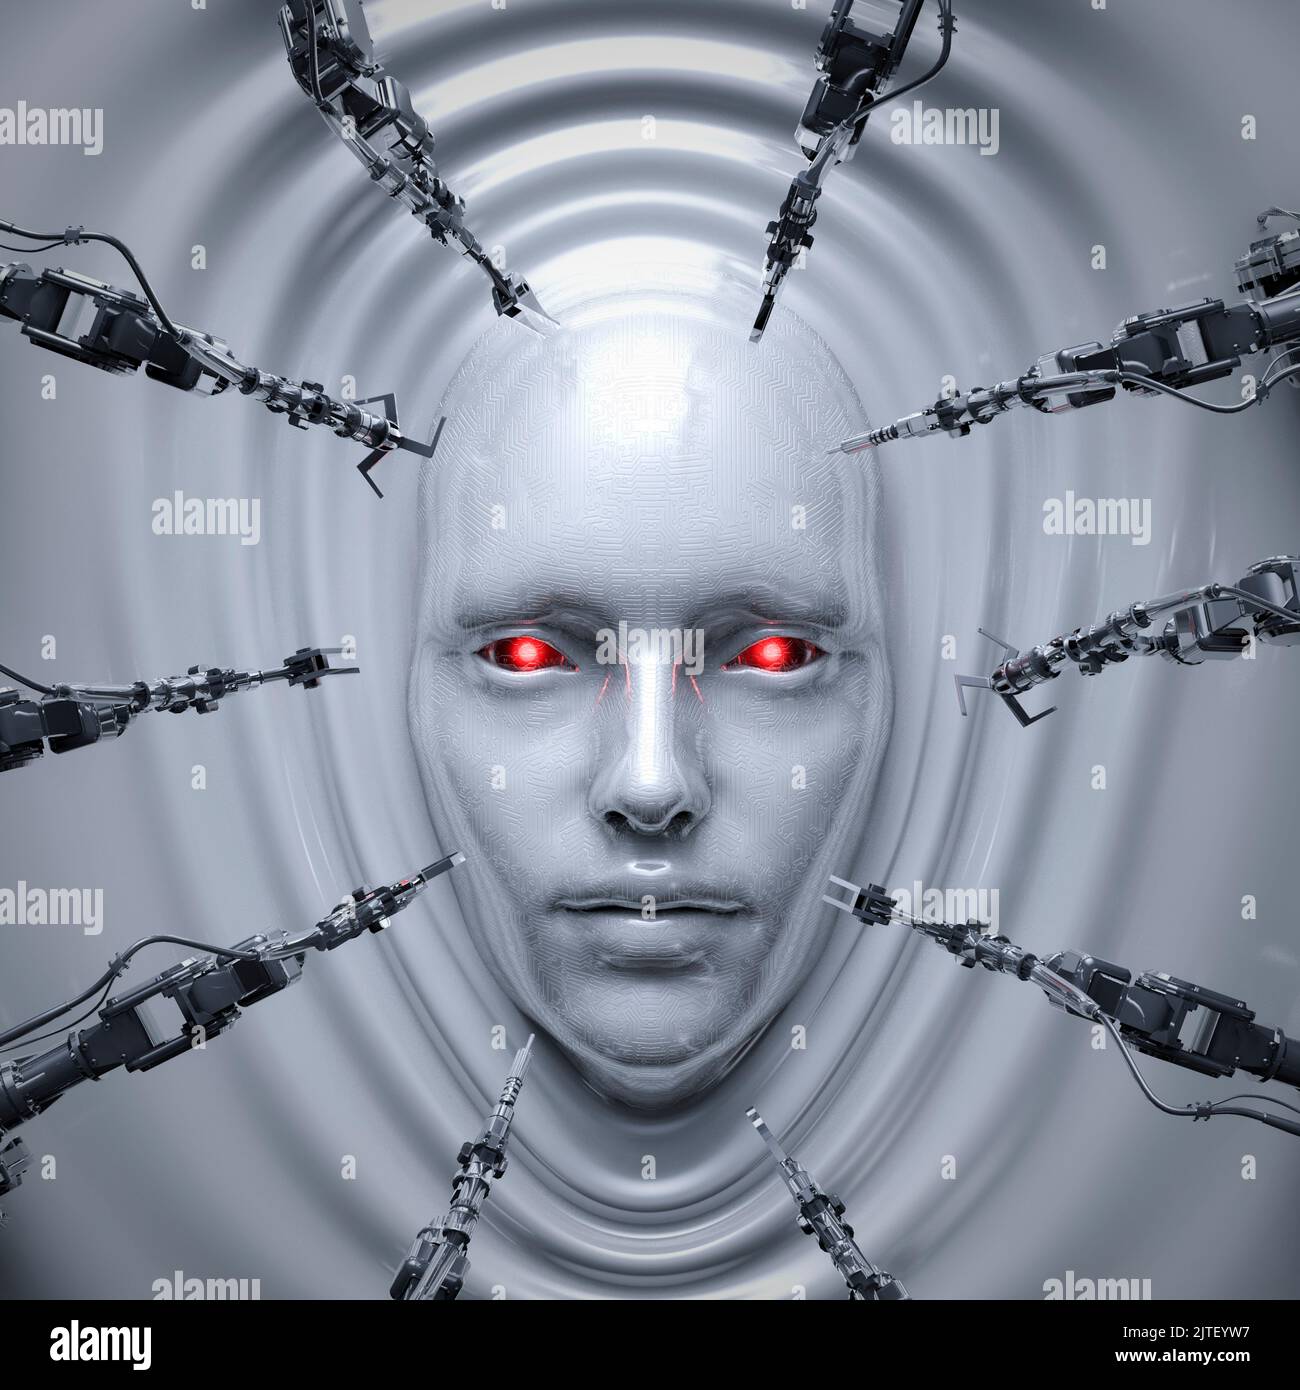 Female robot creation - 3D illustration of science fiction cyborg woman forming from molten liquid metal Stock Photo